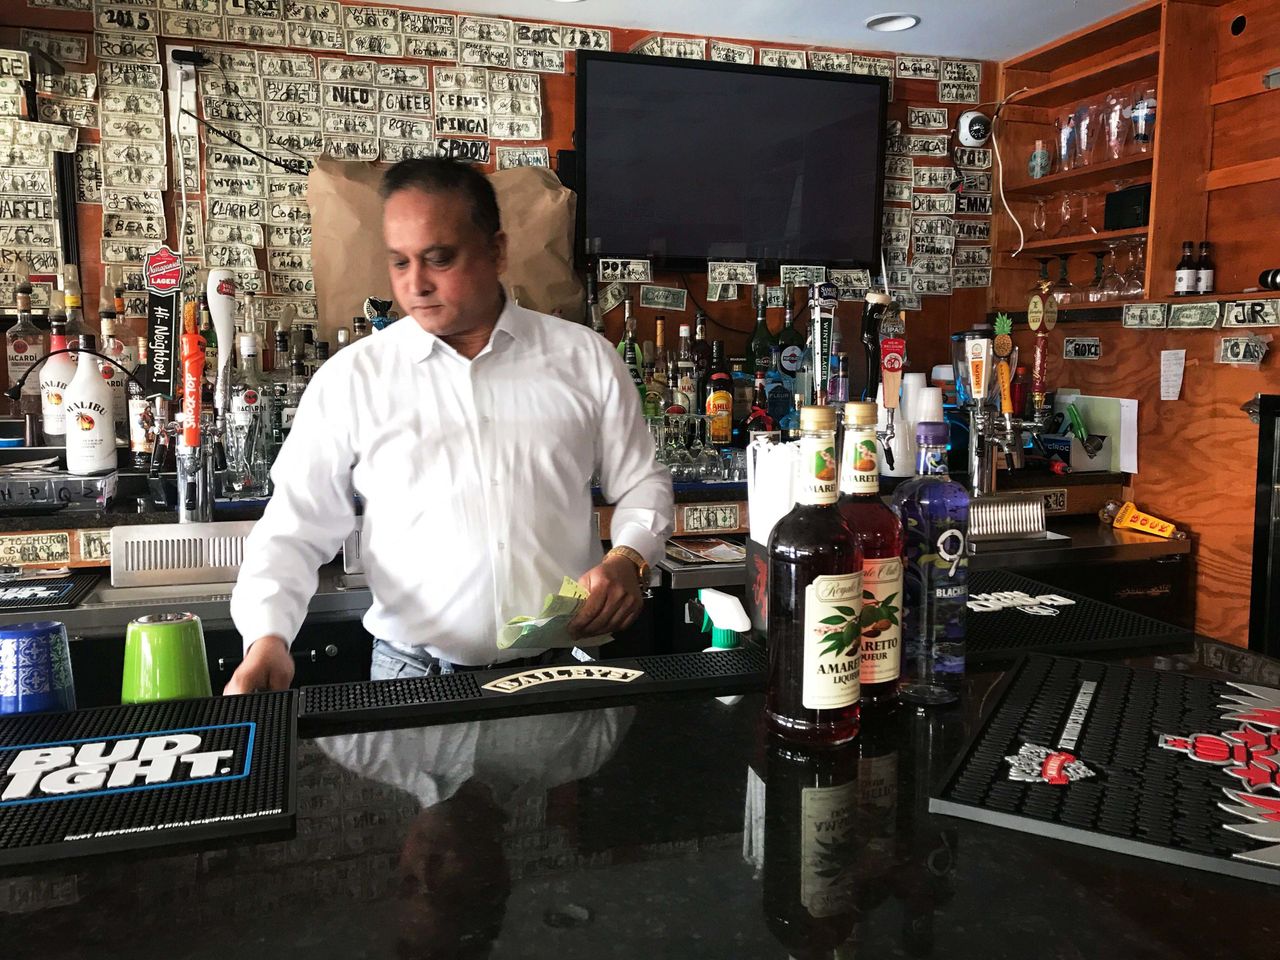 Fazly Rabbi, owner of the Coast Guard cadet hangout bar Slice, said he fears another slow weekend as cadets cut back during the shutdown.